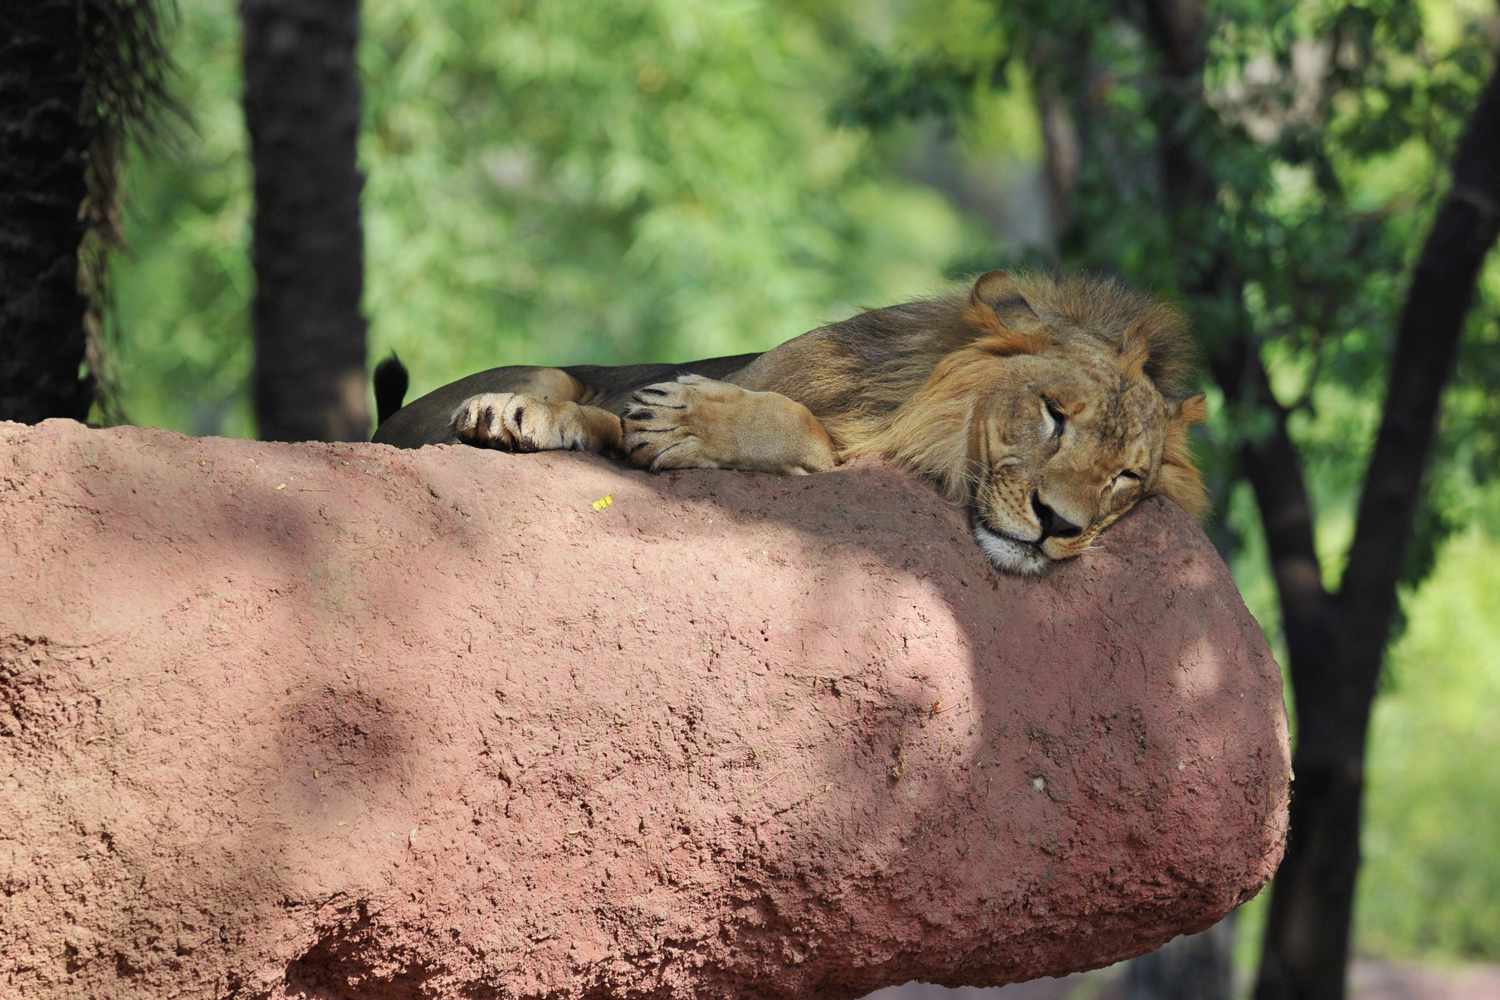 An Asiatic lion rests in the shade at Nehru Zoological Park in the Indian city of Hyderabad